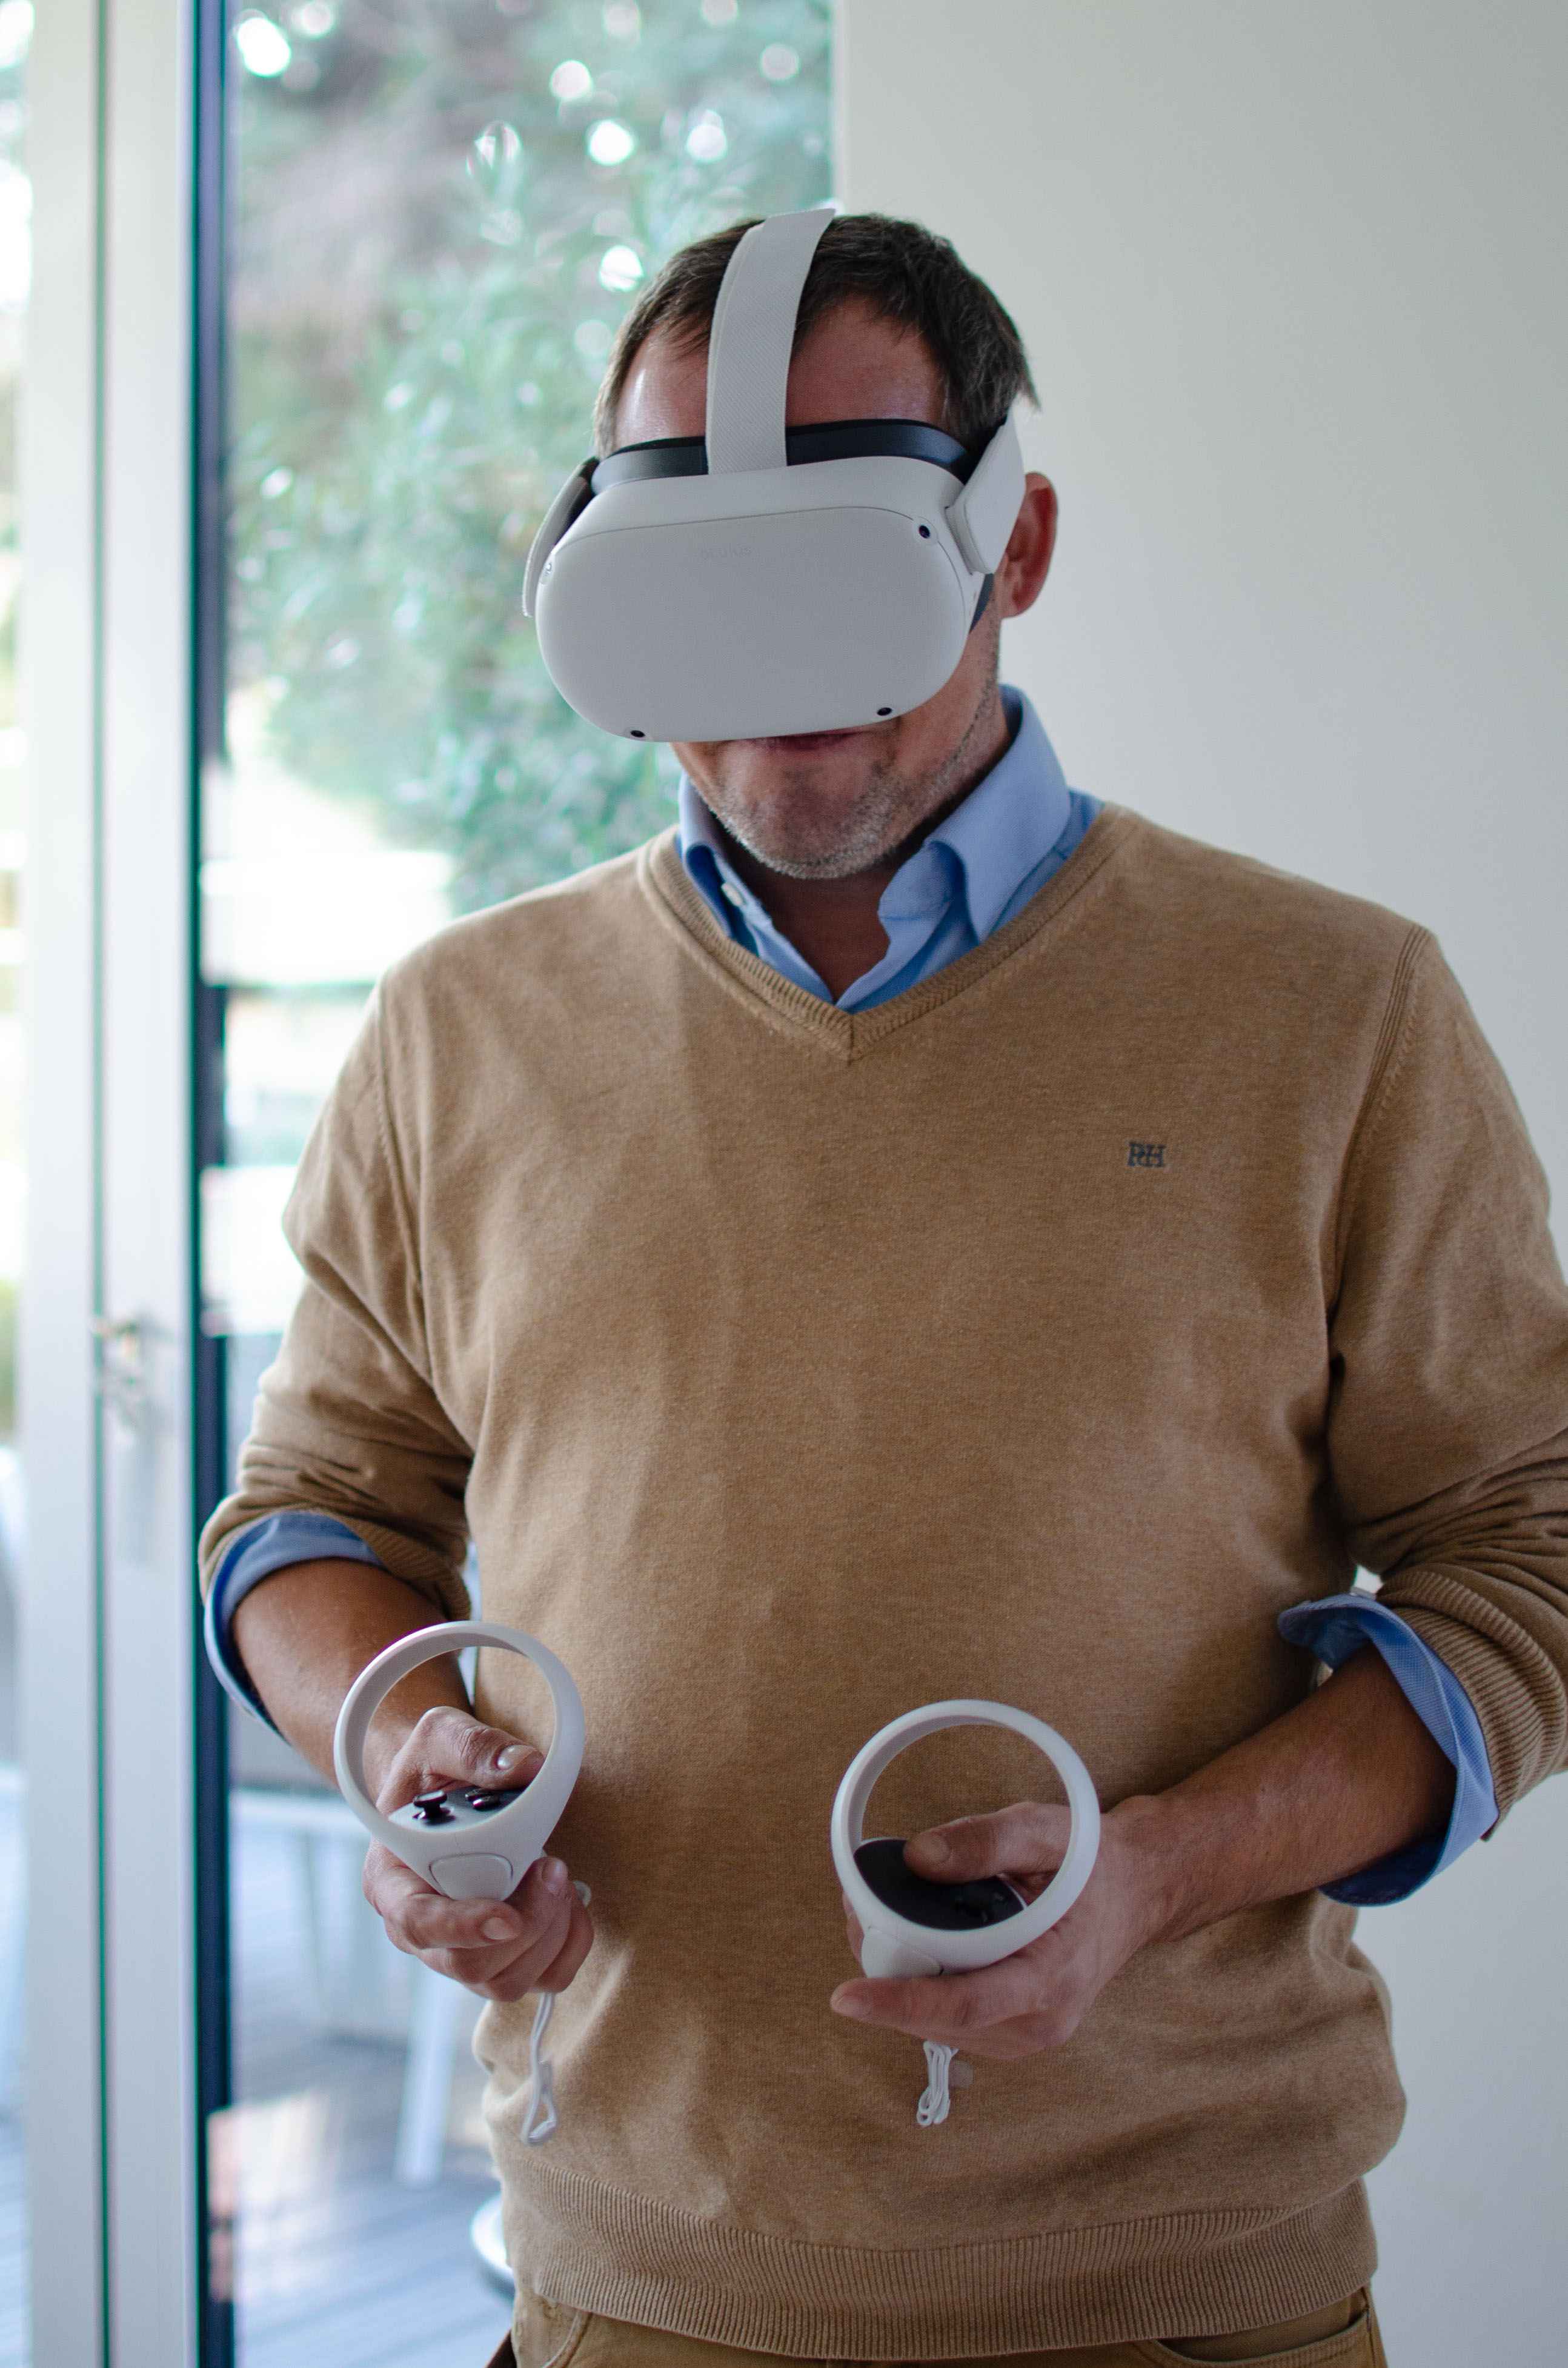 Man with a VR headset on and two VR controllers in hand